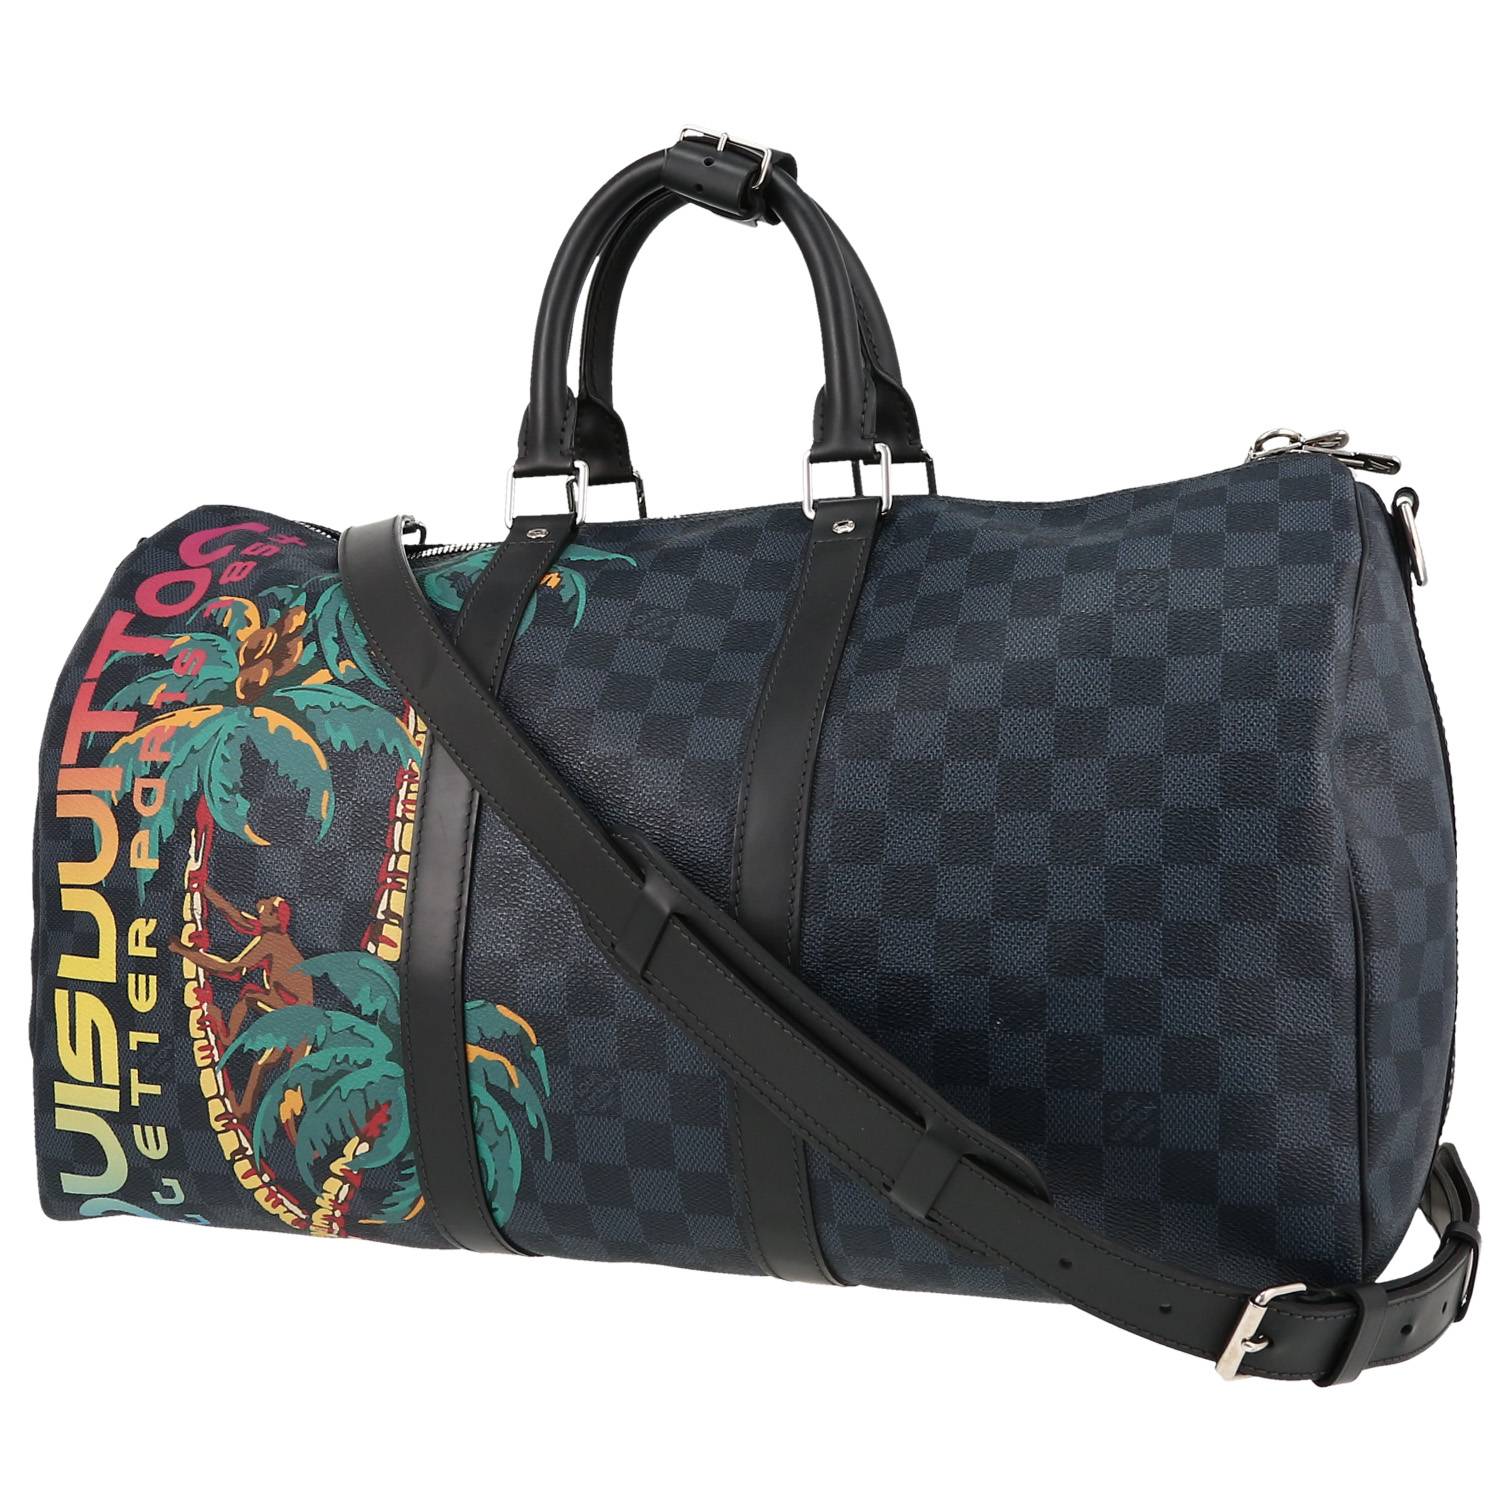 LOUIS VUITTON Monogram Camouflage Keepall 55 Travel Duffle Bag For